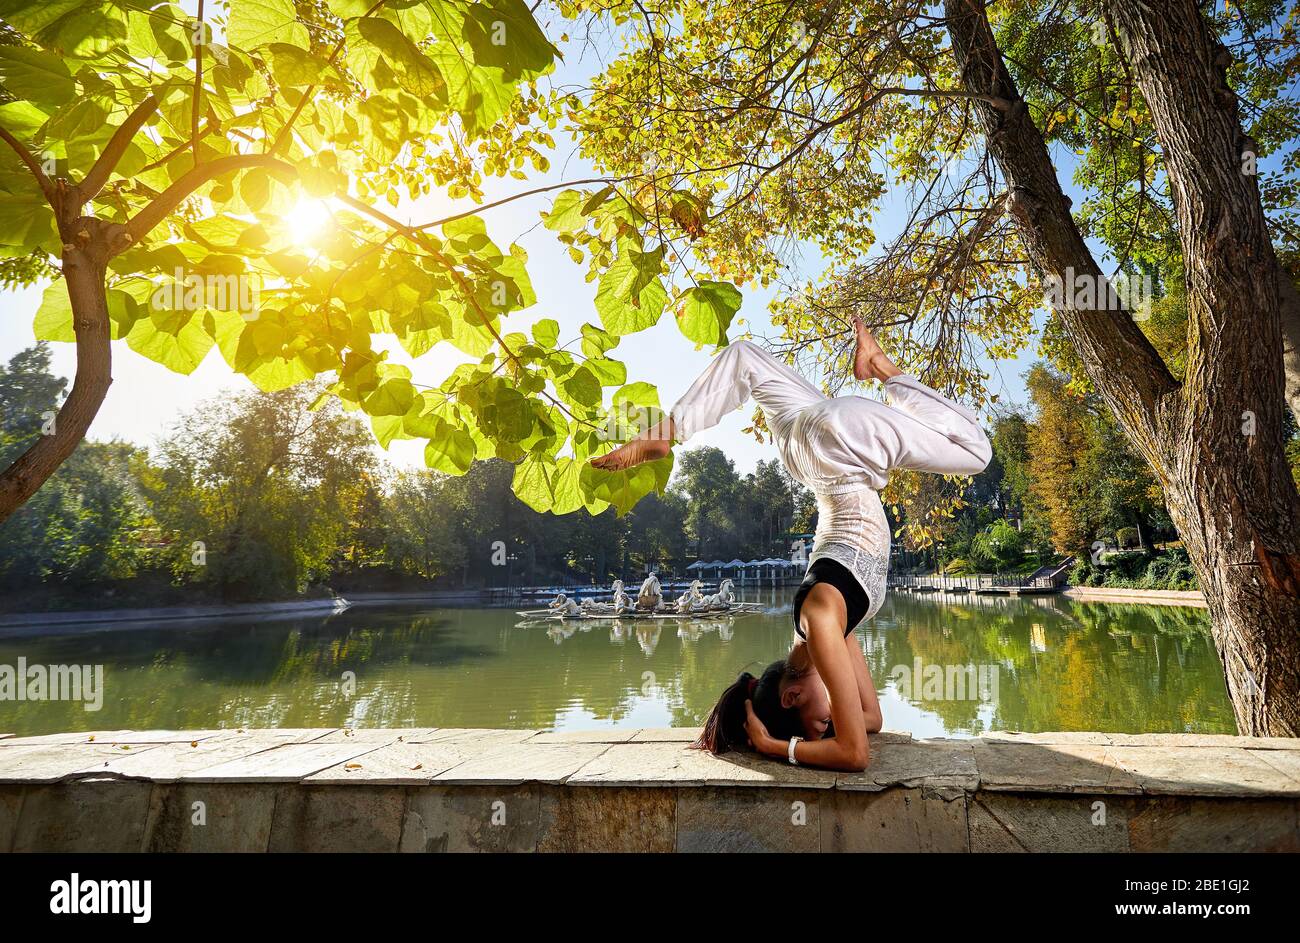 Beautiful Asian girl in white costume doing head stand yoga position in the park Stock Photo